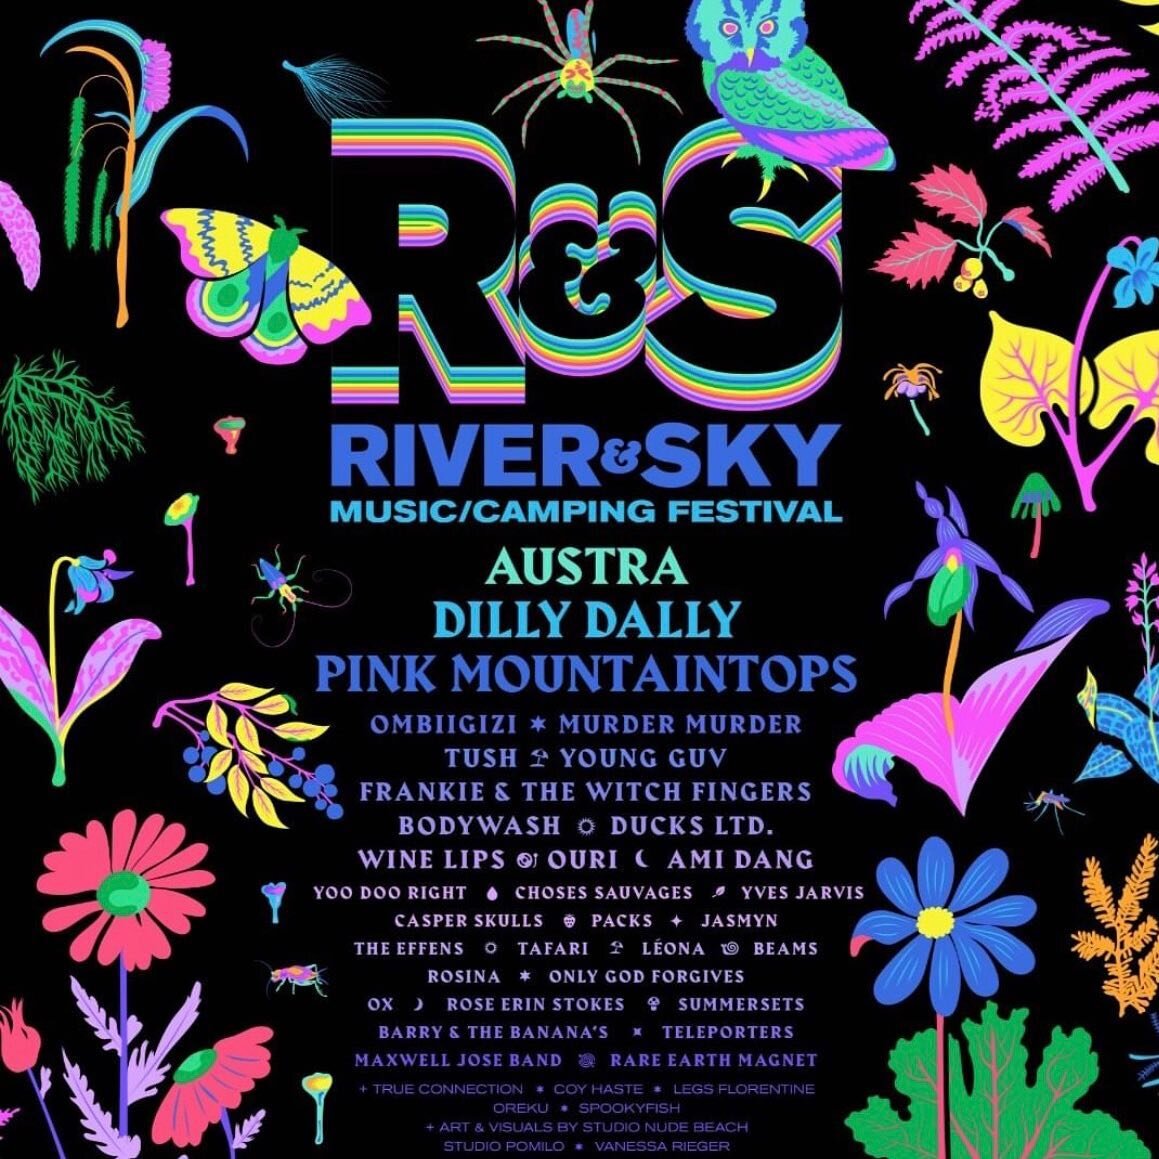 We are so so excited to be making our festival debut at @riverandsky this July! See you on the beach!